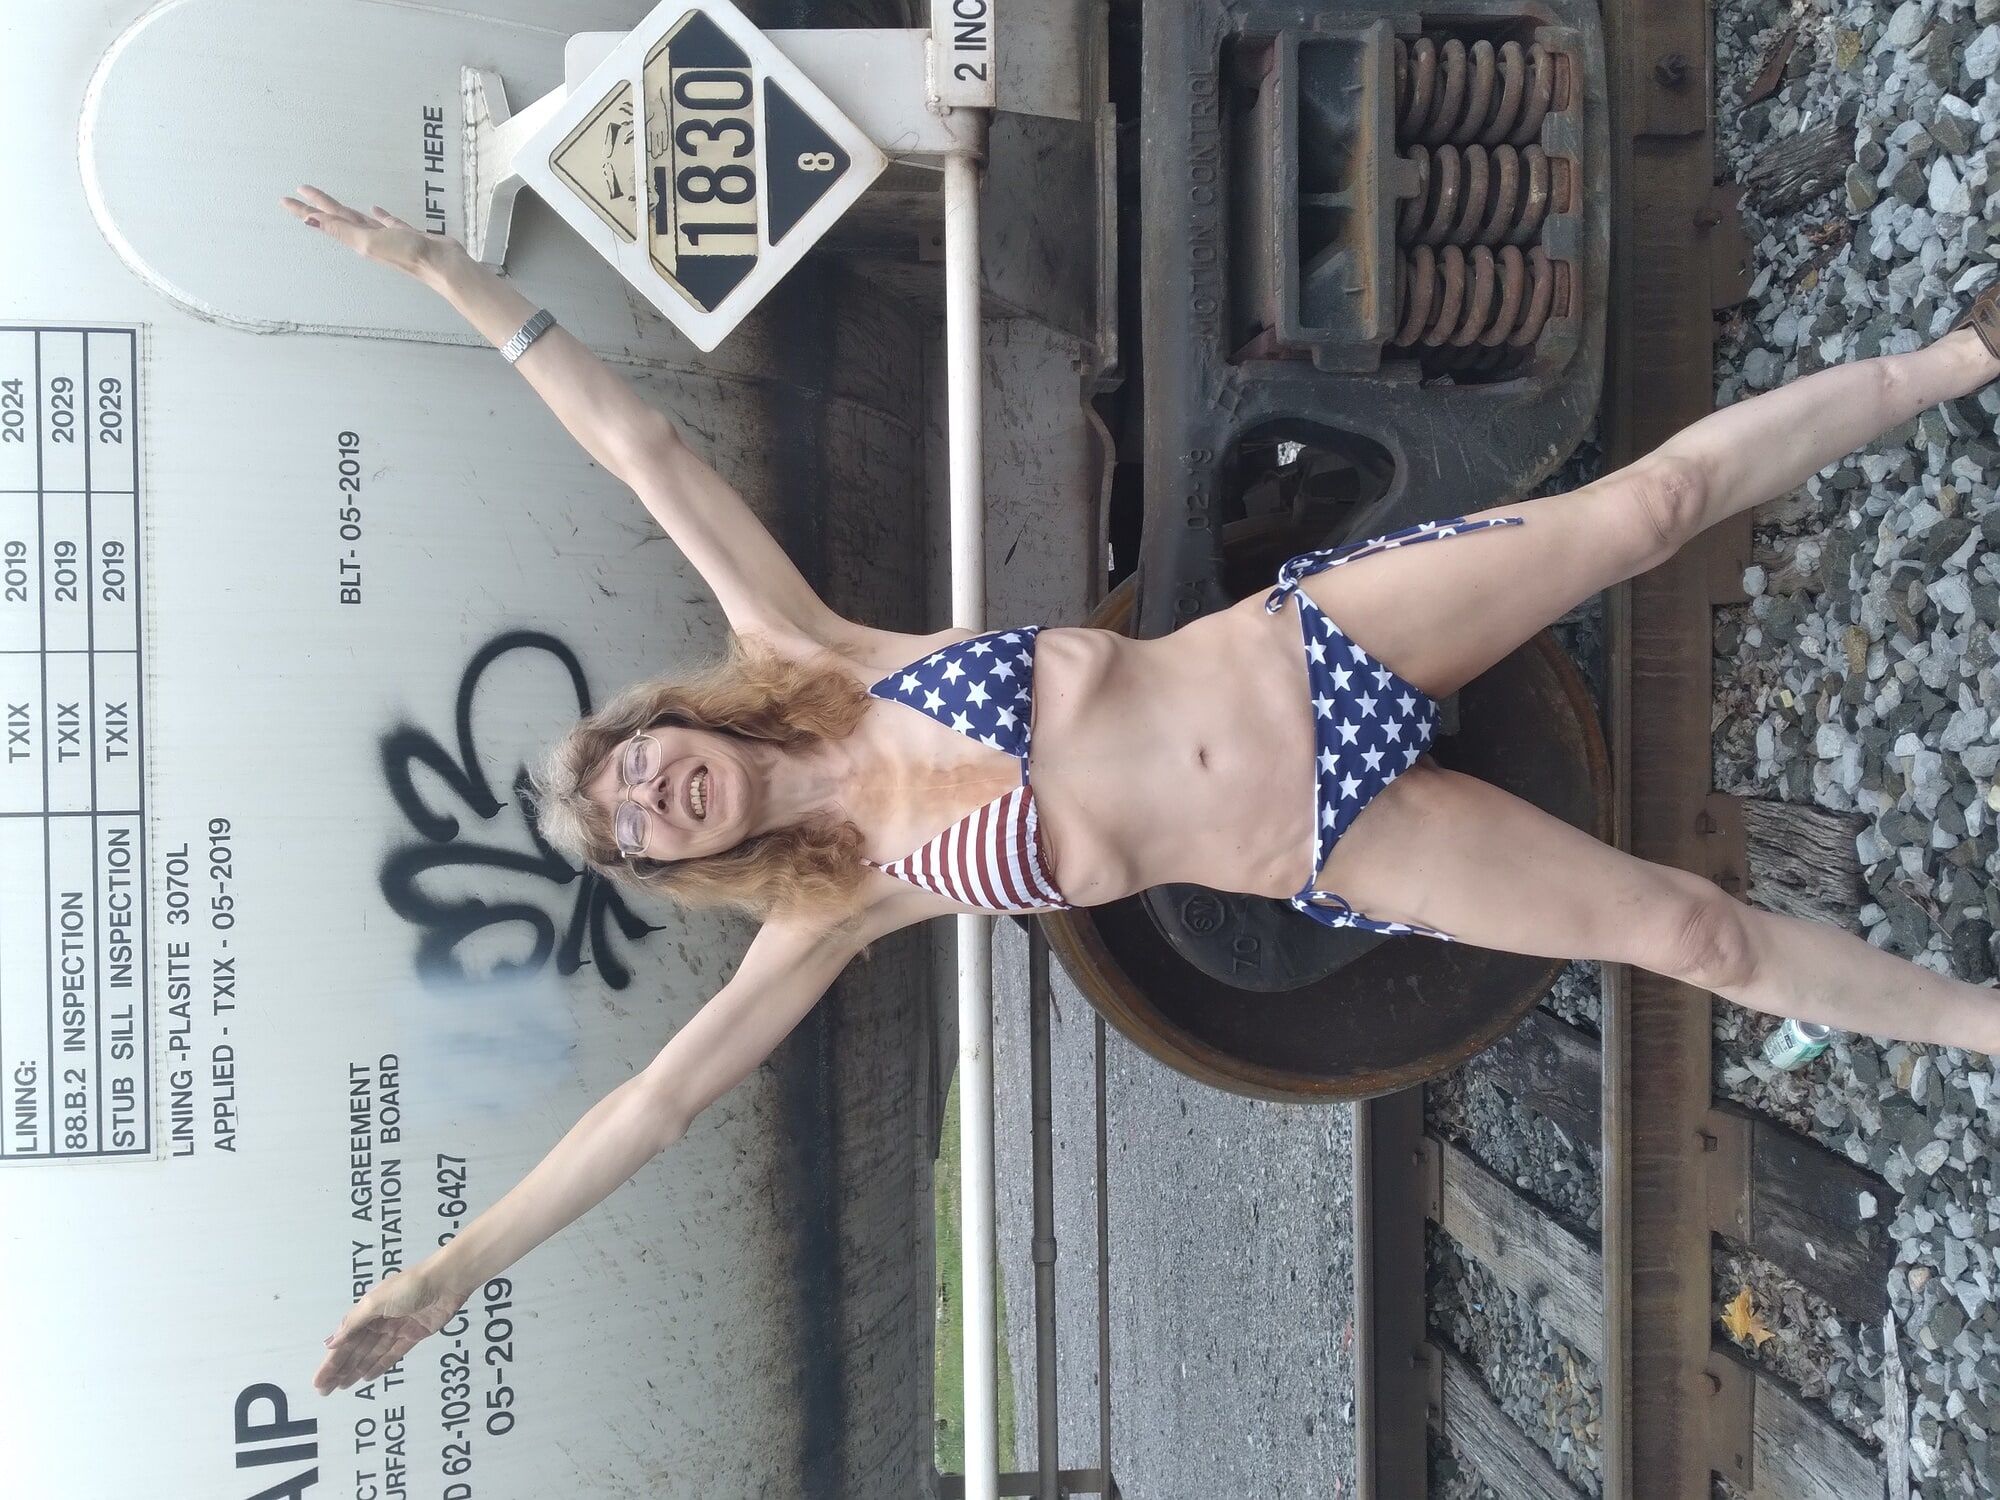 American Train. July 4th release. My best photo set to date. #18